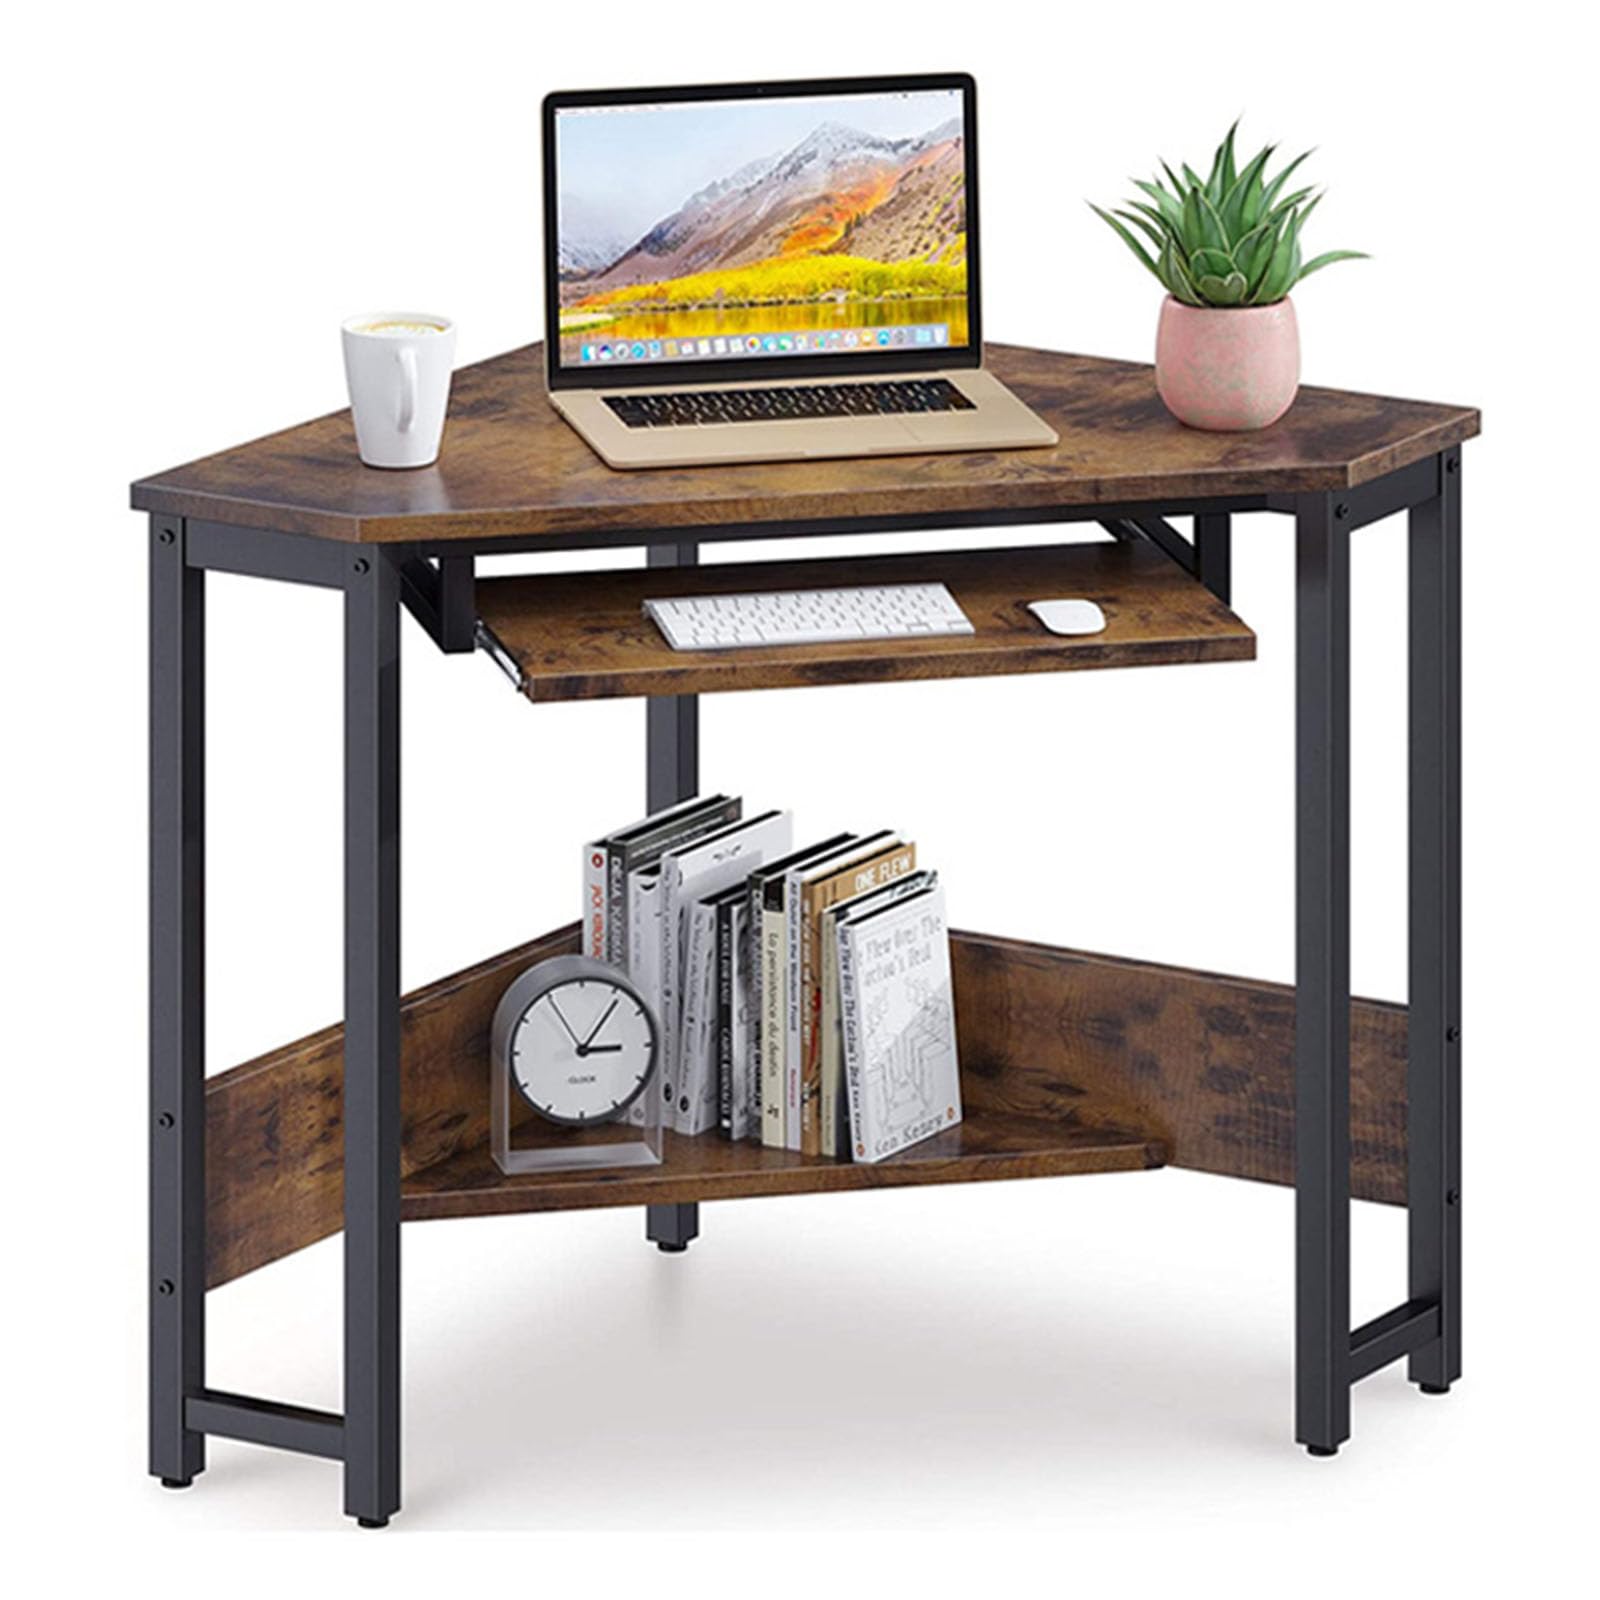 Corner Desk for Small Space,Computer Corner Desk,corner desks for home office,small desk for bedroom,corner desk small space,for Workstation with Smooth Keyboard Tray Storage Shelves.(Color:brown)